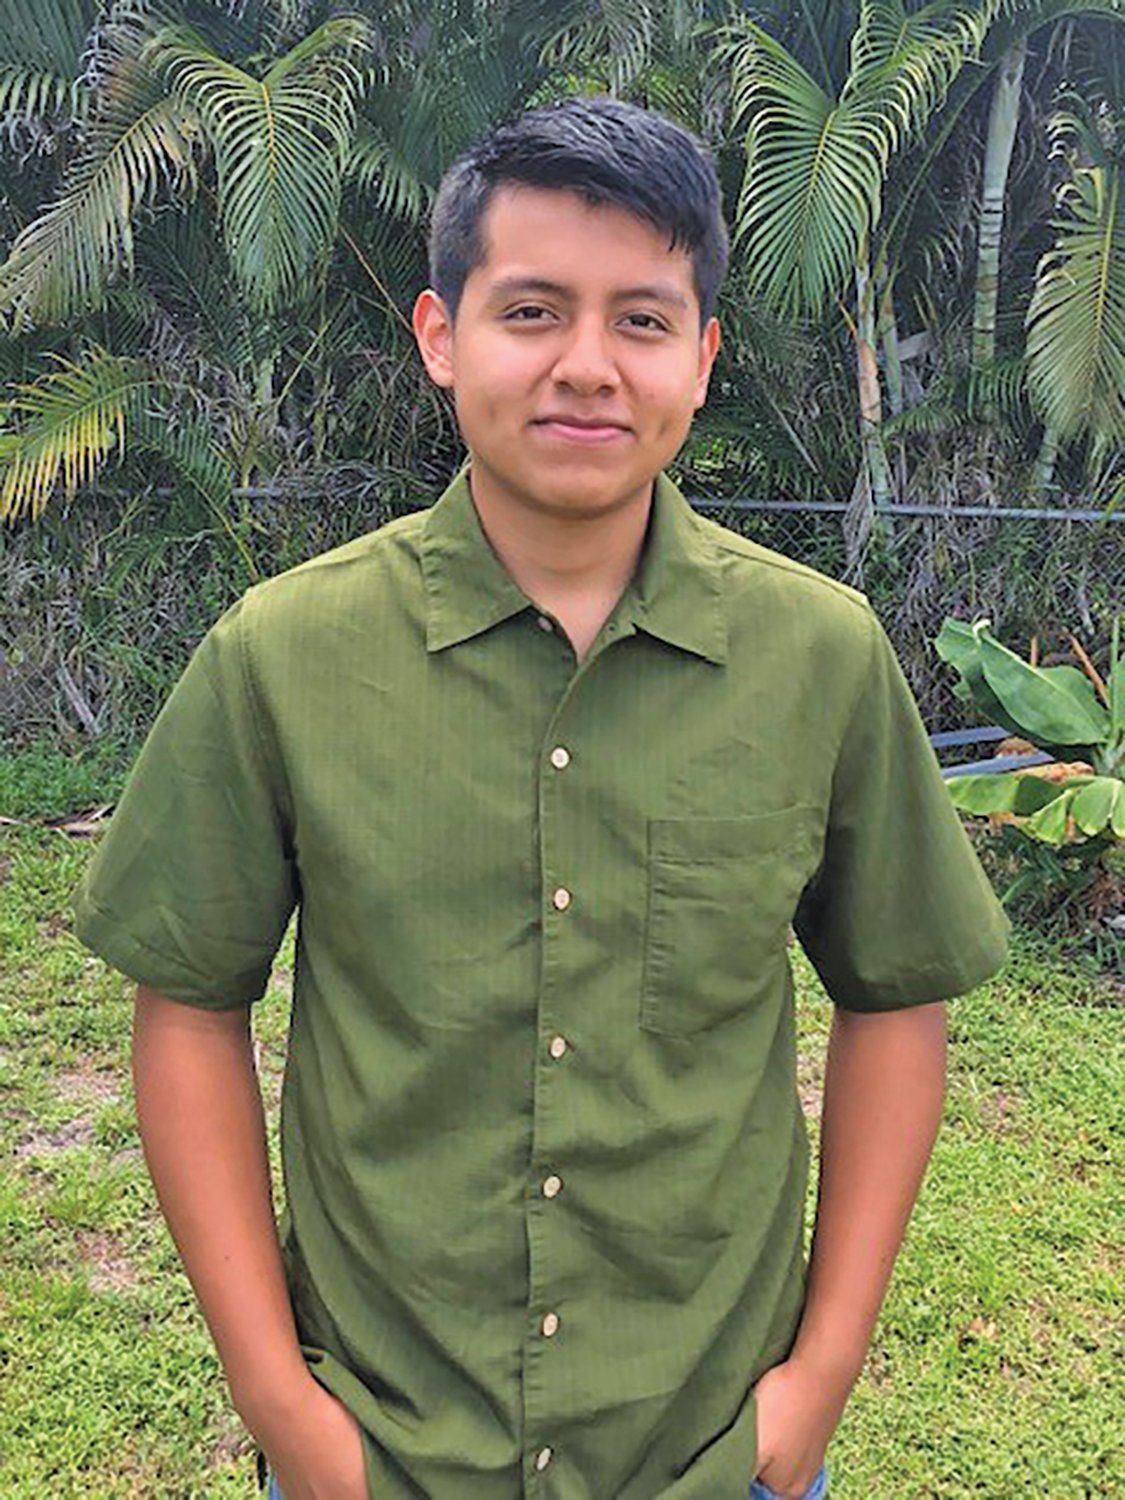 Eduardo Diego-Marroquin became a tutor with Immokalee Readers because he wanted a part-time job. He then joined the Career Pathways program and realized it would allow to explore possibilities.